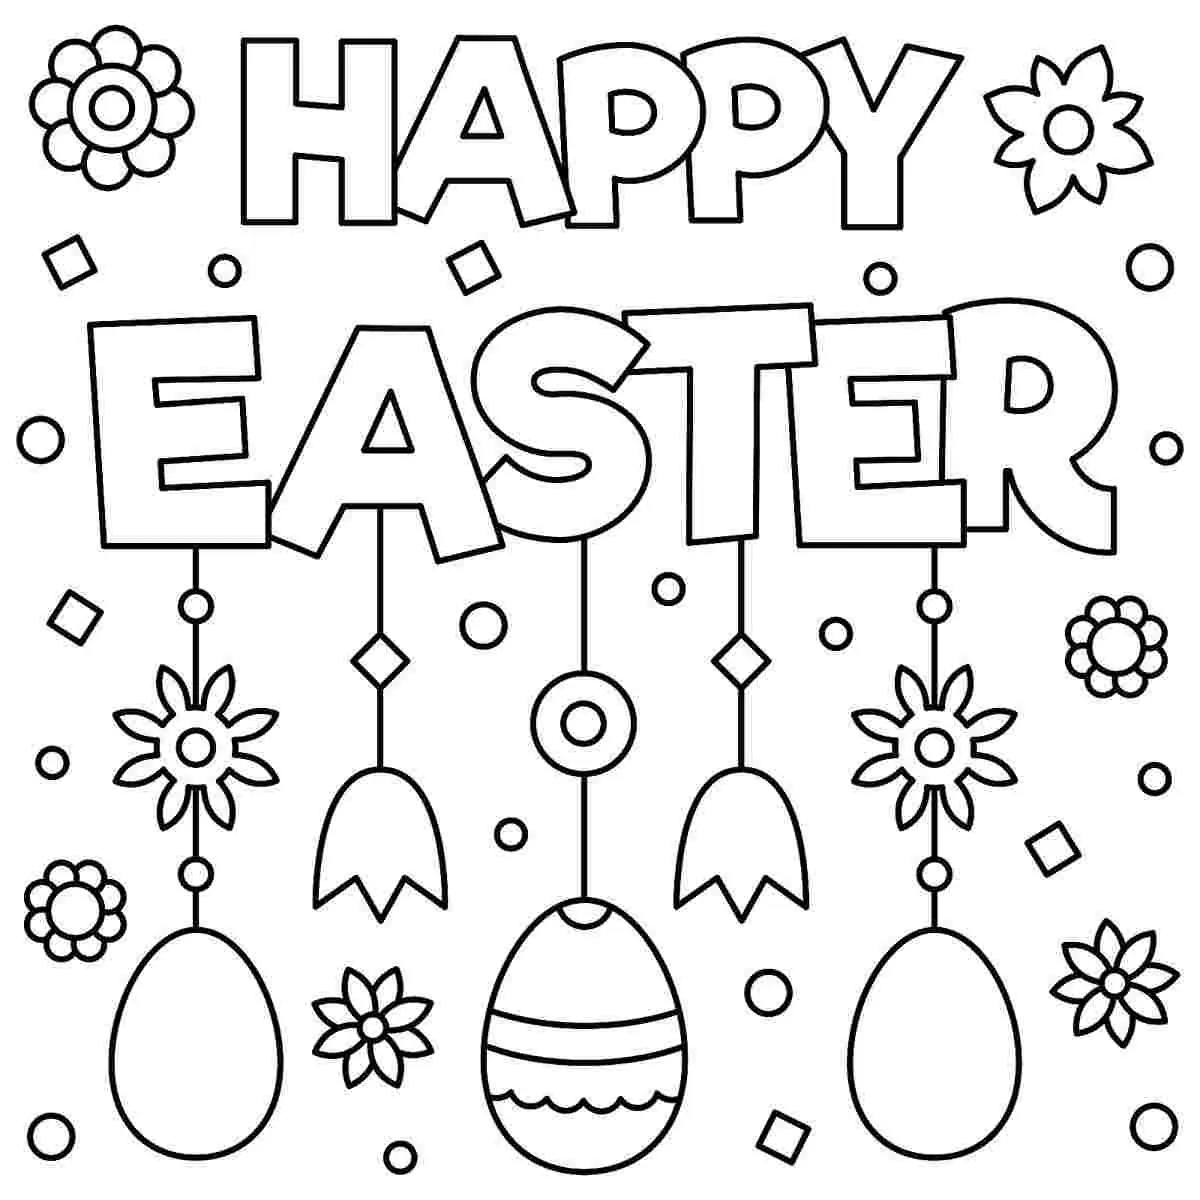 Printable Easter Coloring Pages for Kids and Adults Oh La De